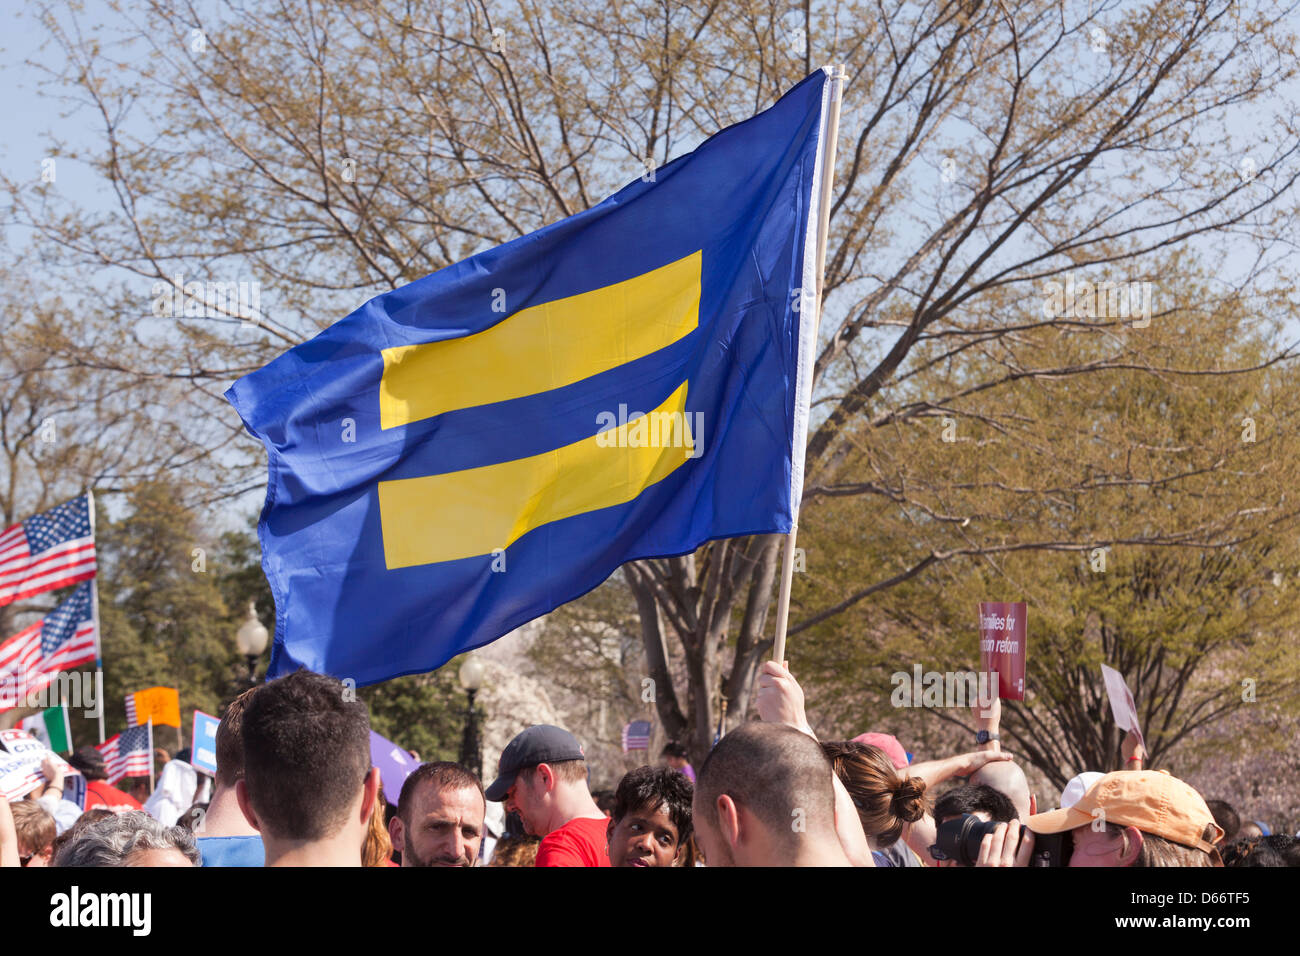 Equality symbol flag in crowd Stock Photo